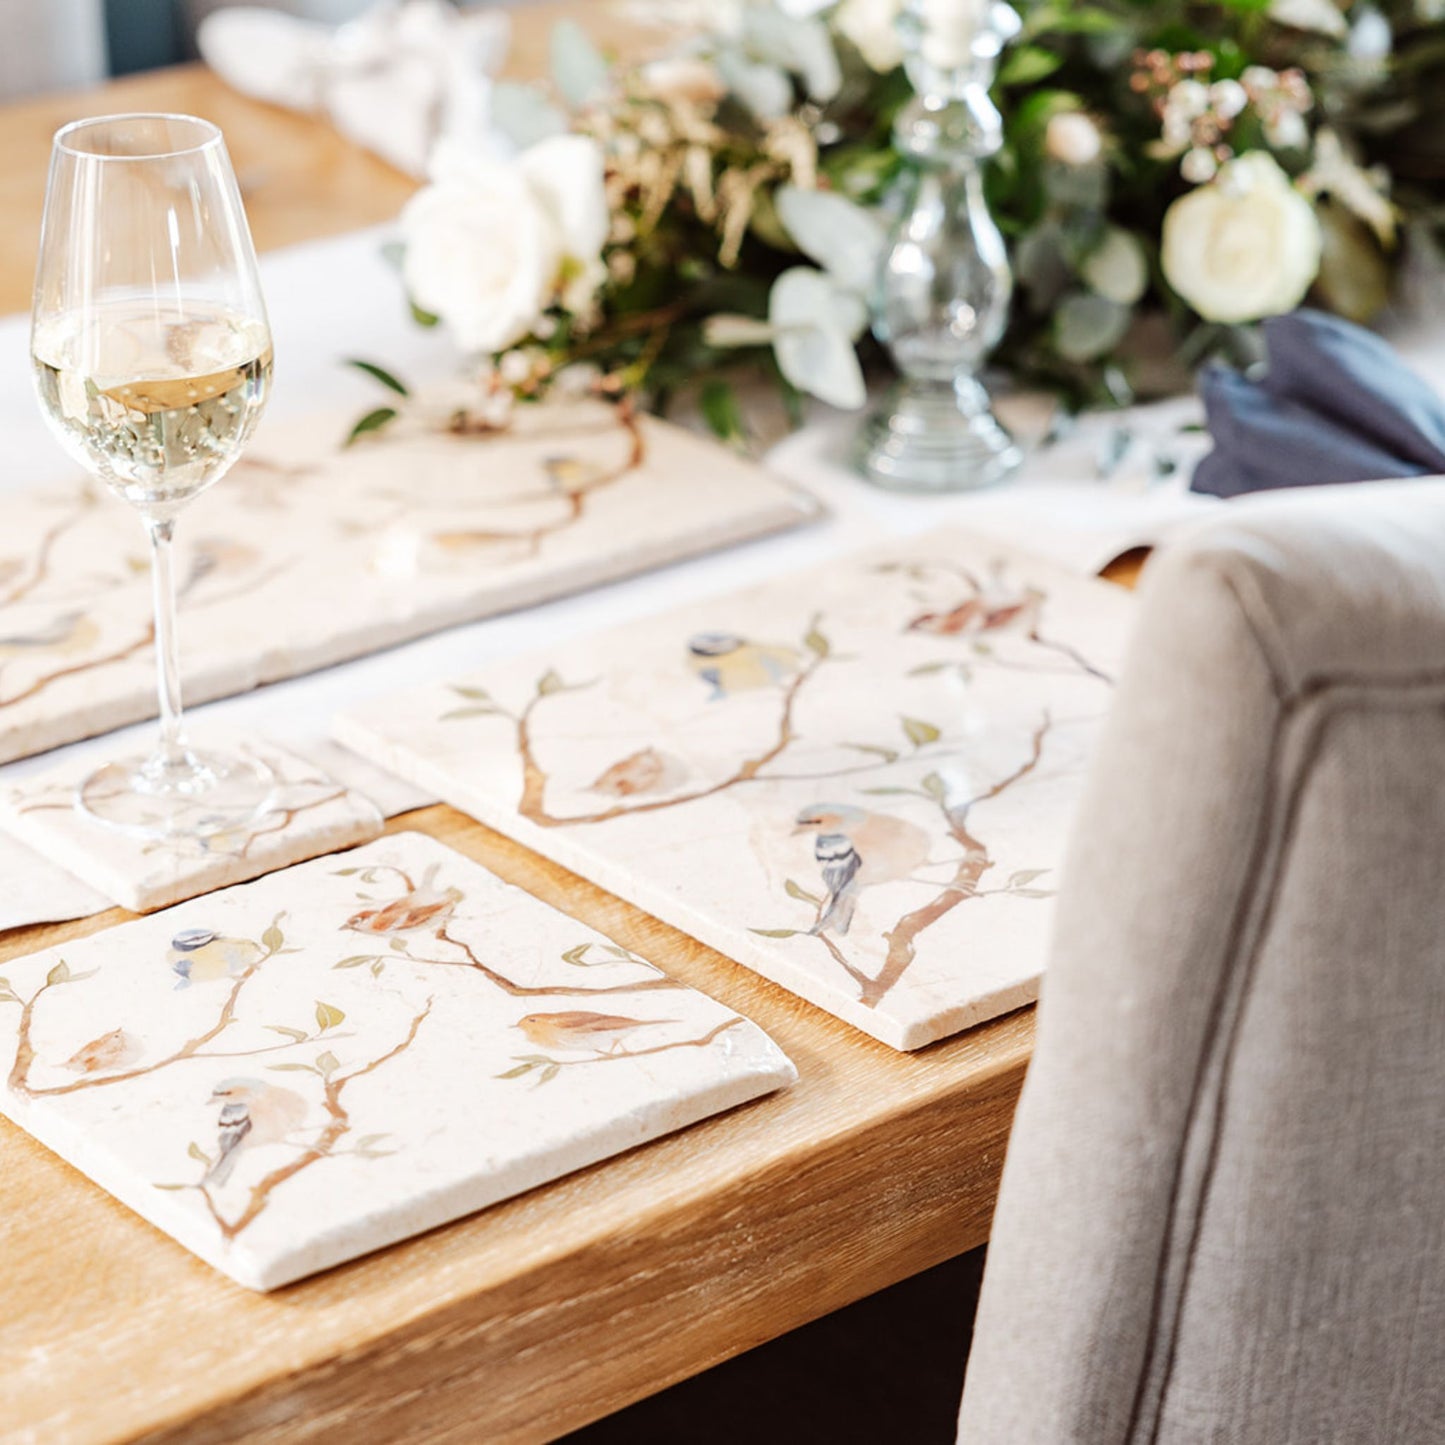 A wooden dining table set with cream marble placemats and coasters. The placemats are square and feature British garden birds on branches in a watercolour style.